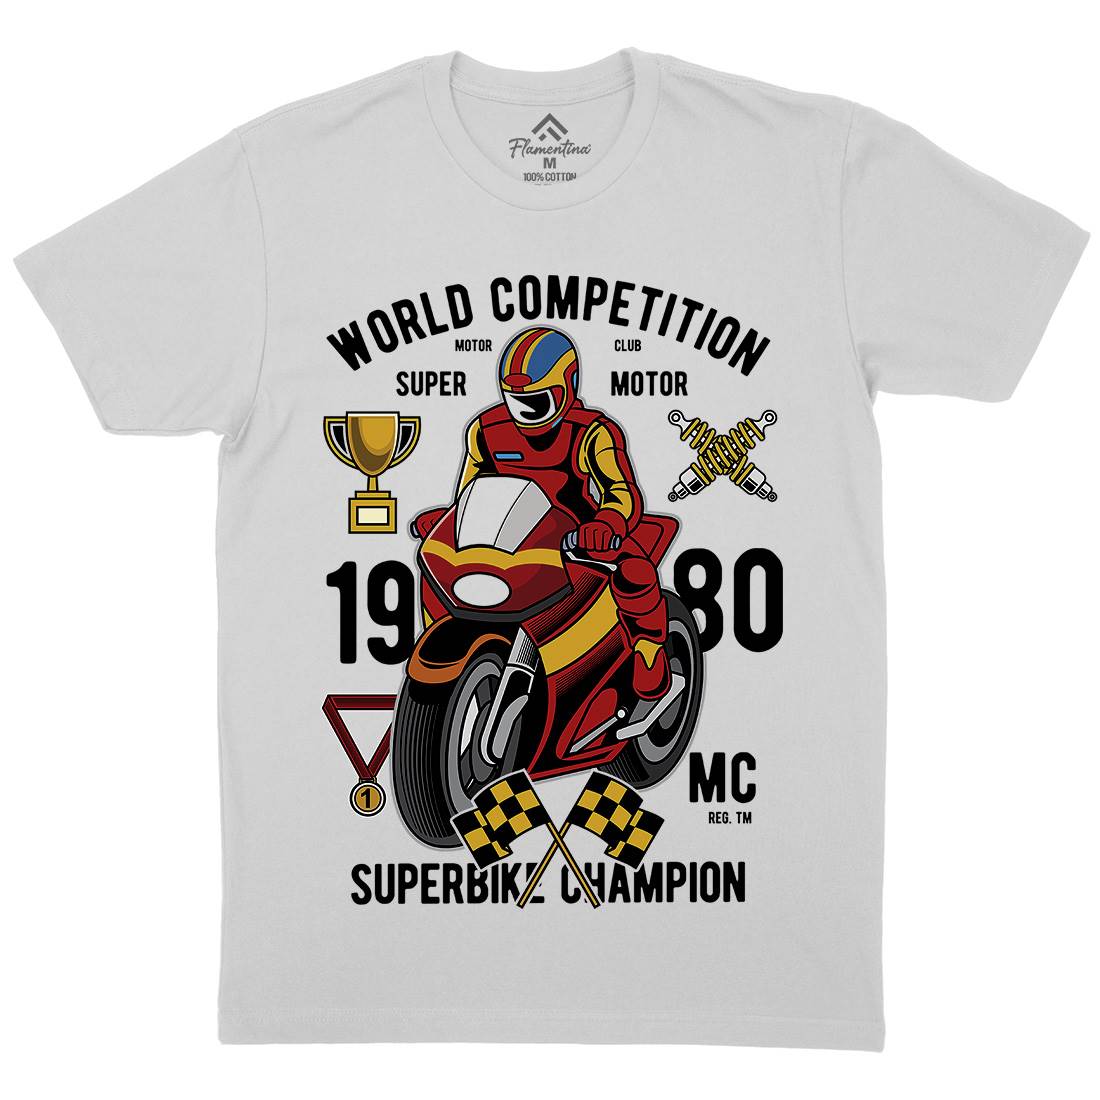 Super Bike World Competition Mens Crew Neck T-Shirt Motorcycles C458